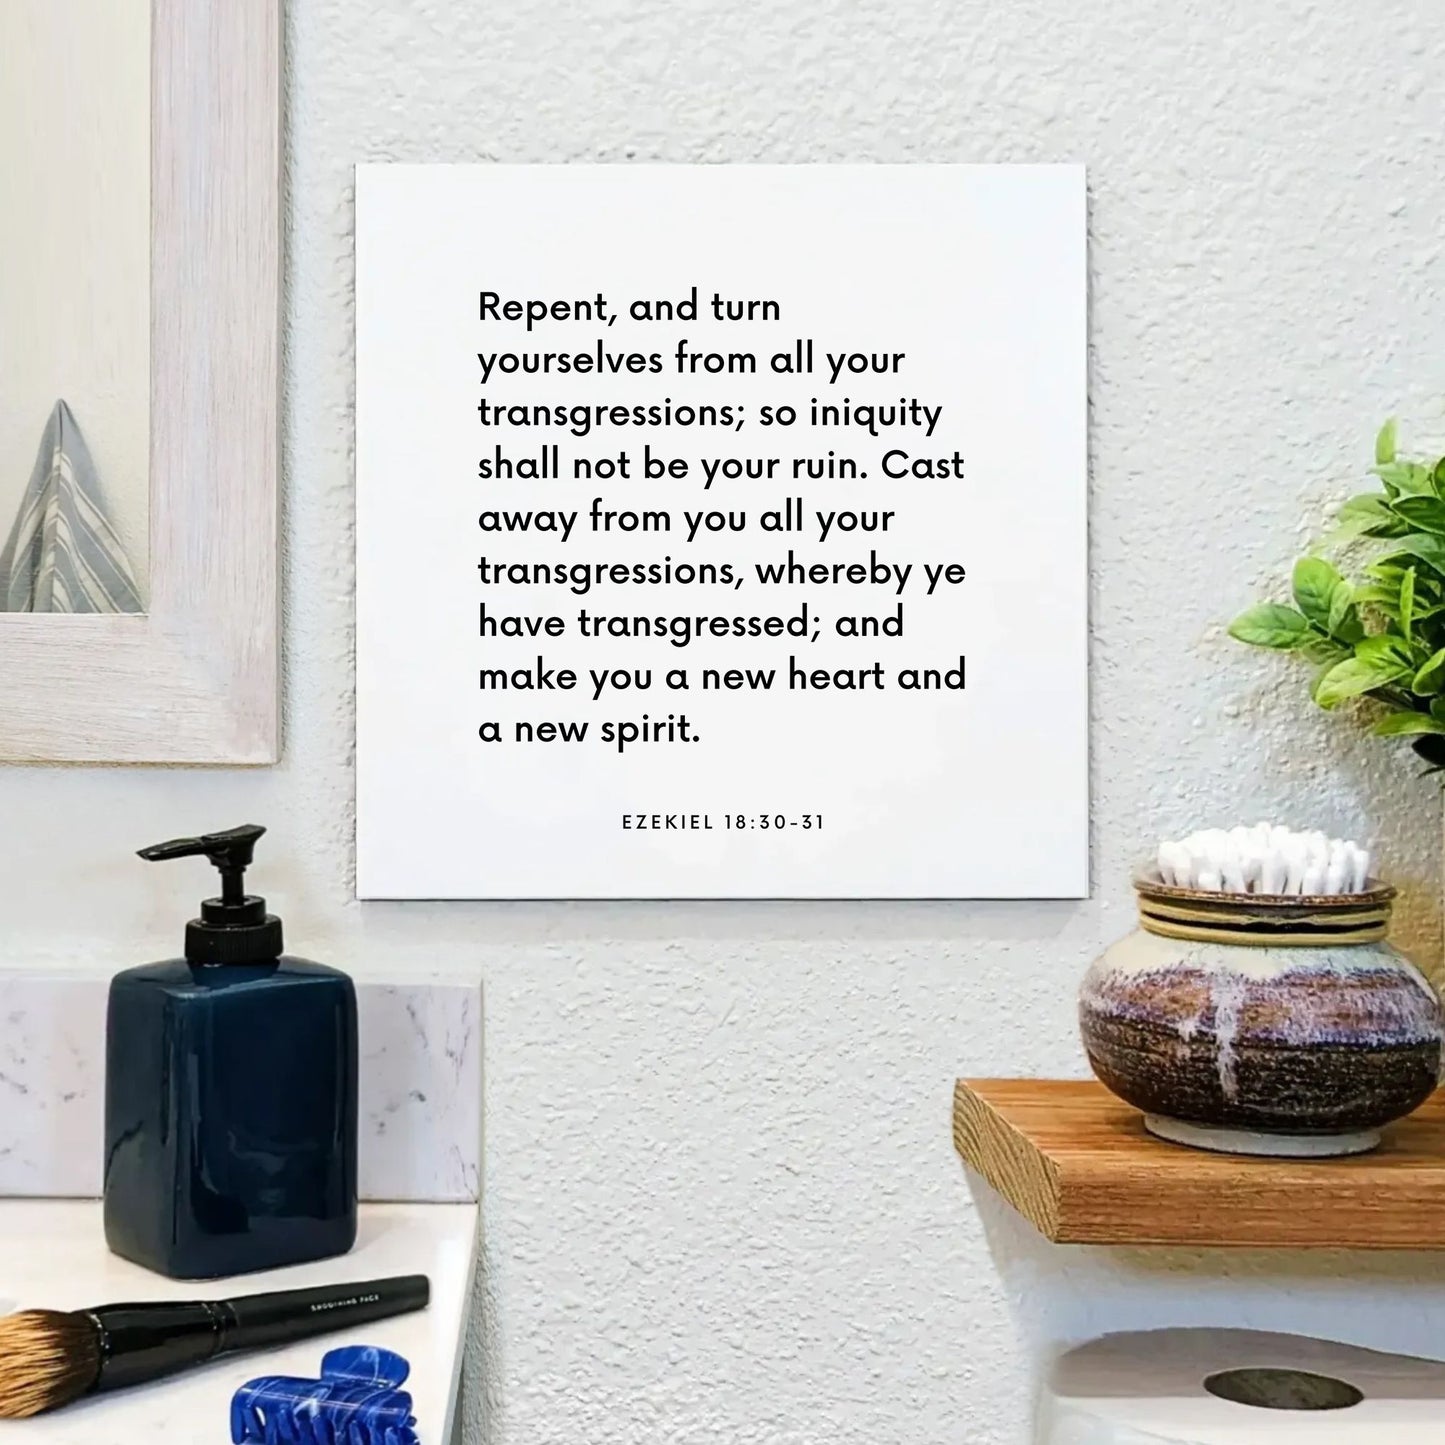 Bathroom mouting of the scripture tile for Ezekiel 18:30-31 - "Make you a new heart and a new spirit"